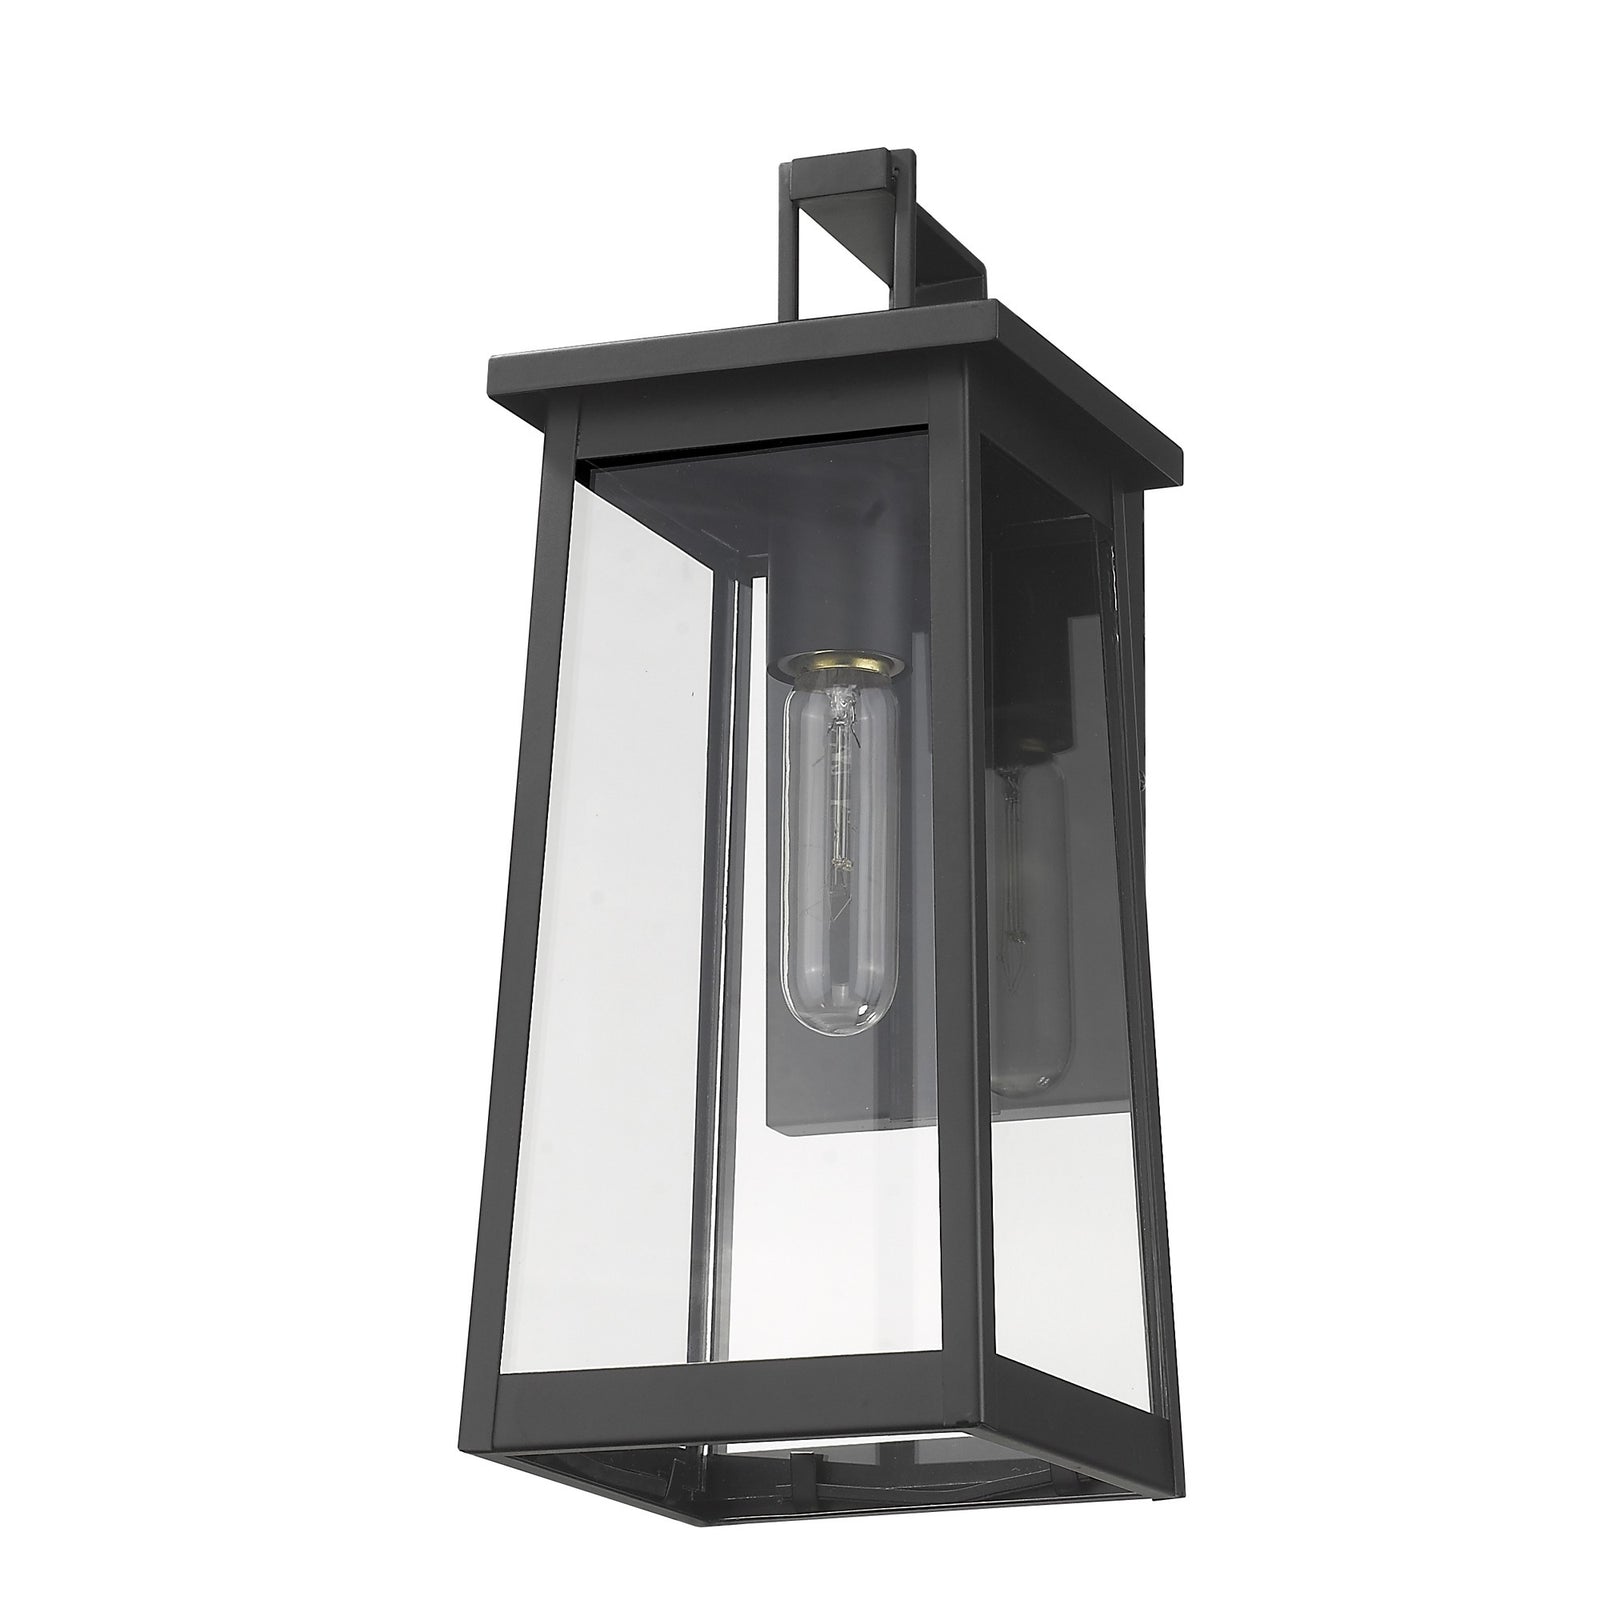 Black Contempo Elongated Outdoor Wall Light